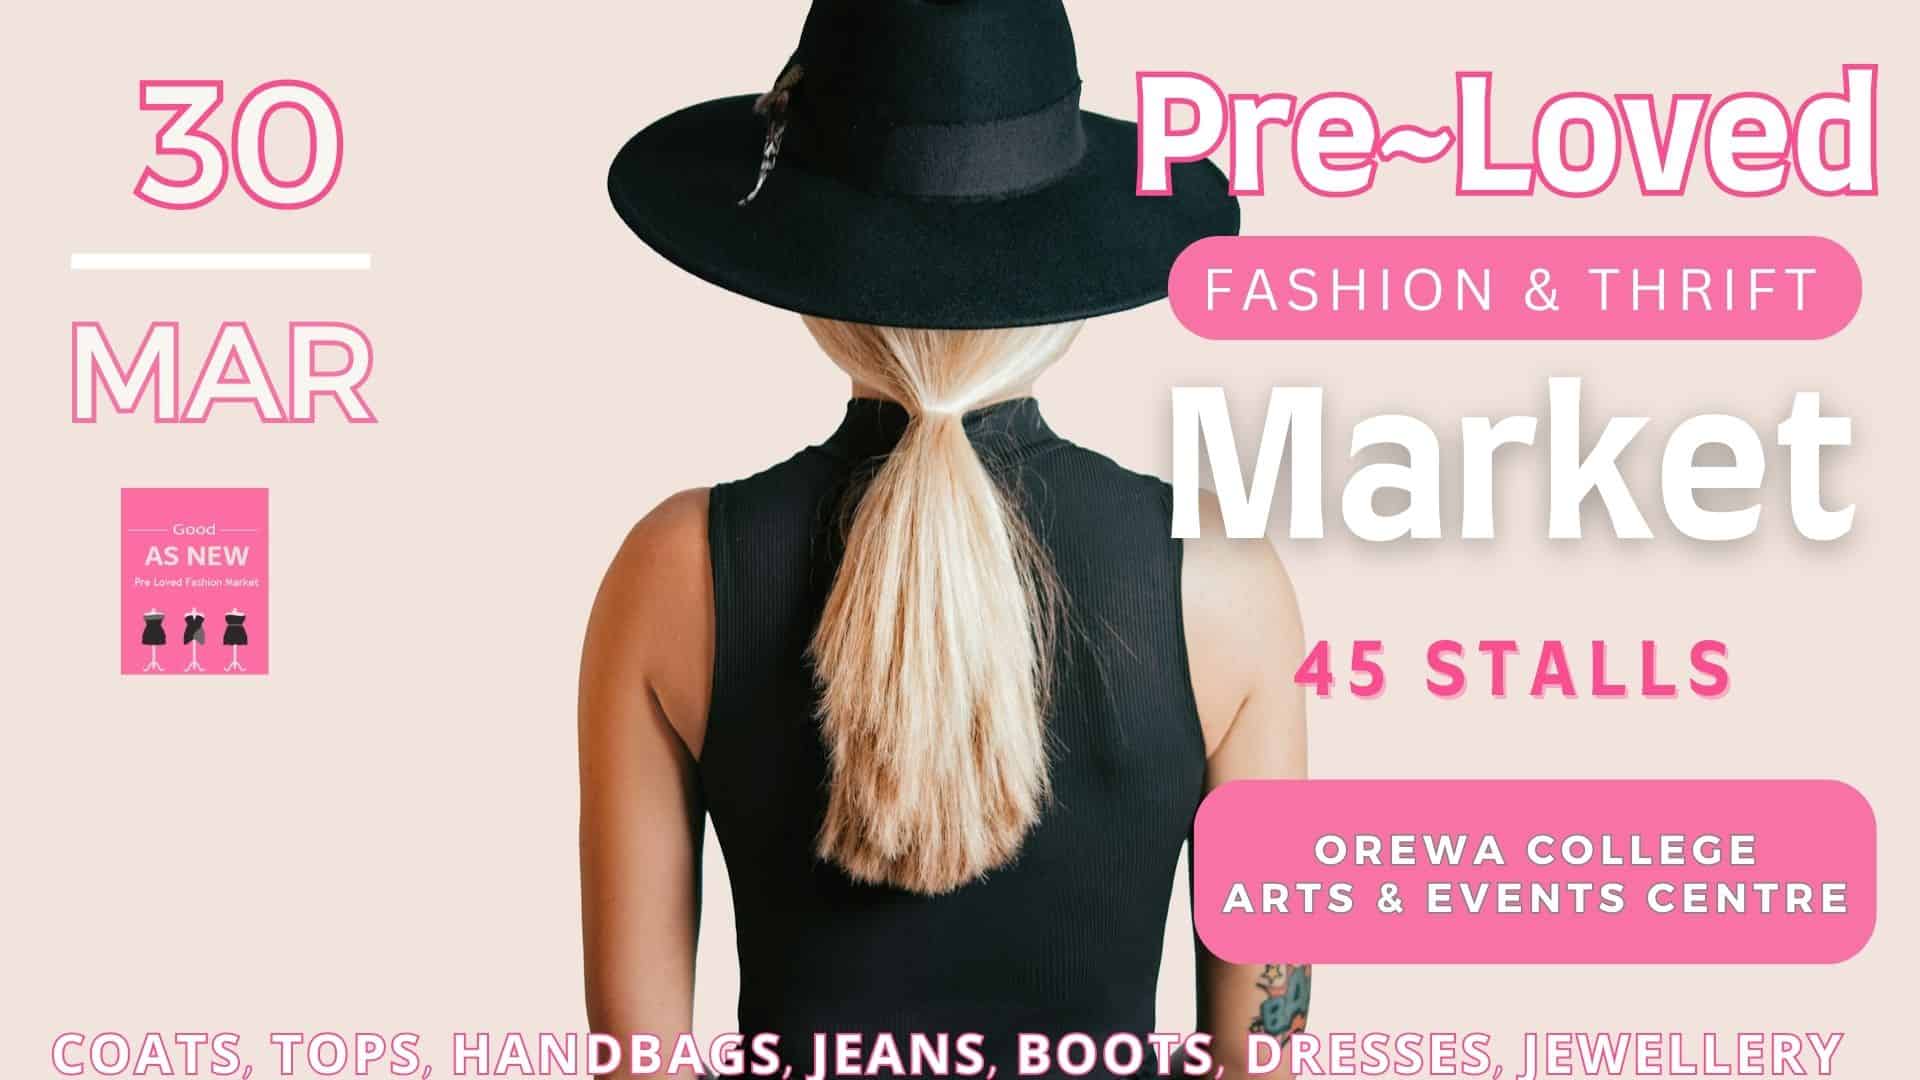 Woman promoting Pre-Loved Fashion Market event.